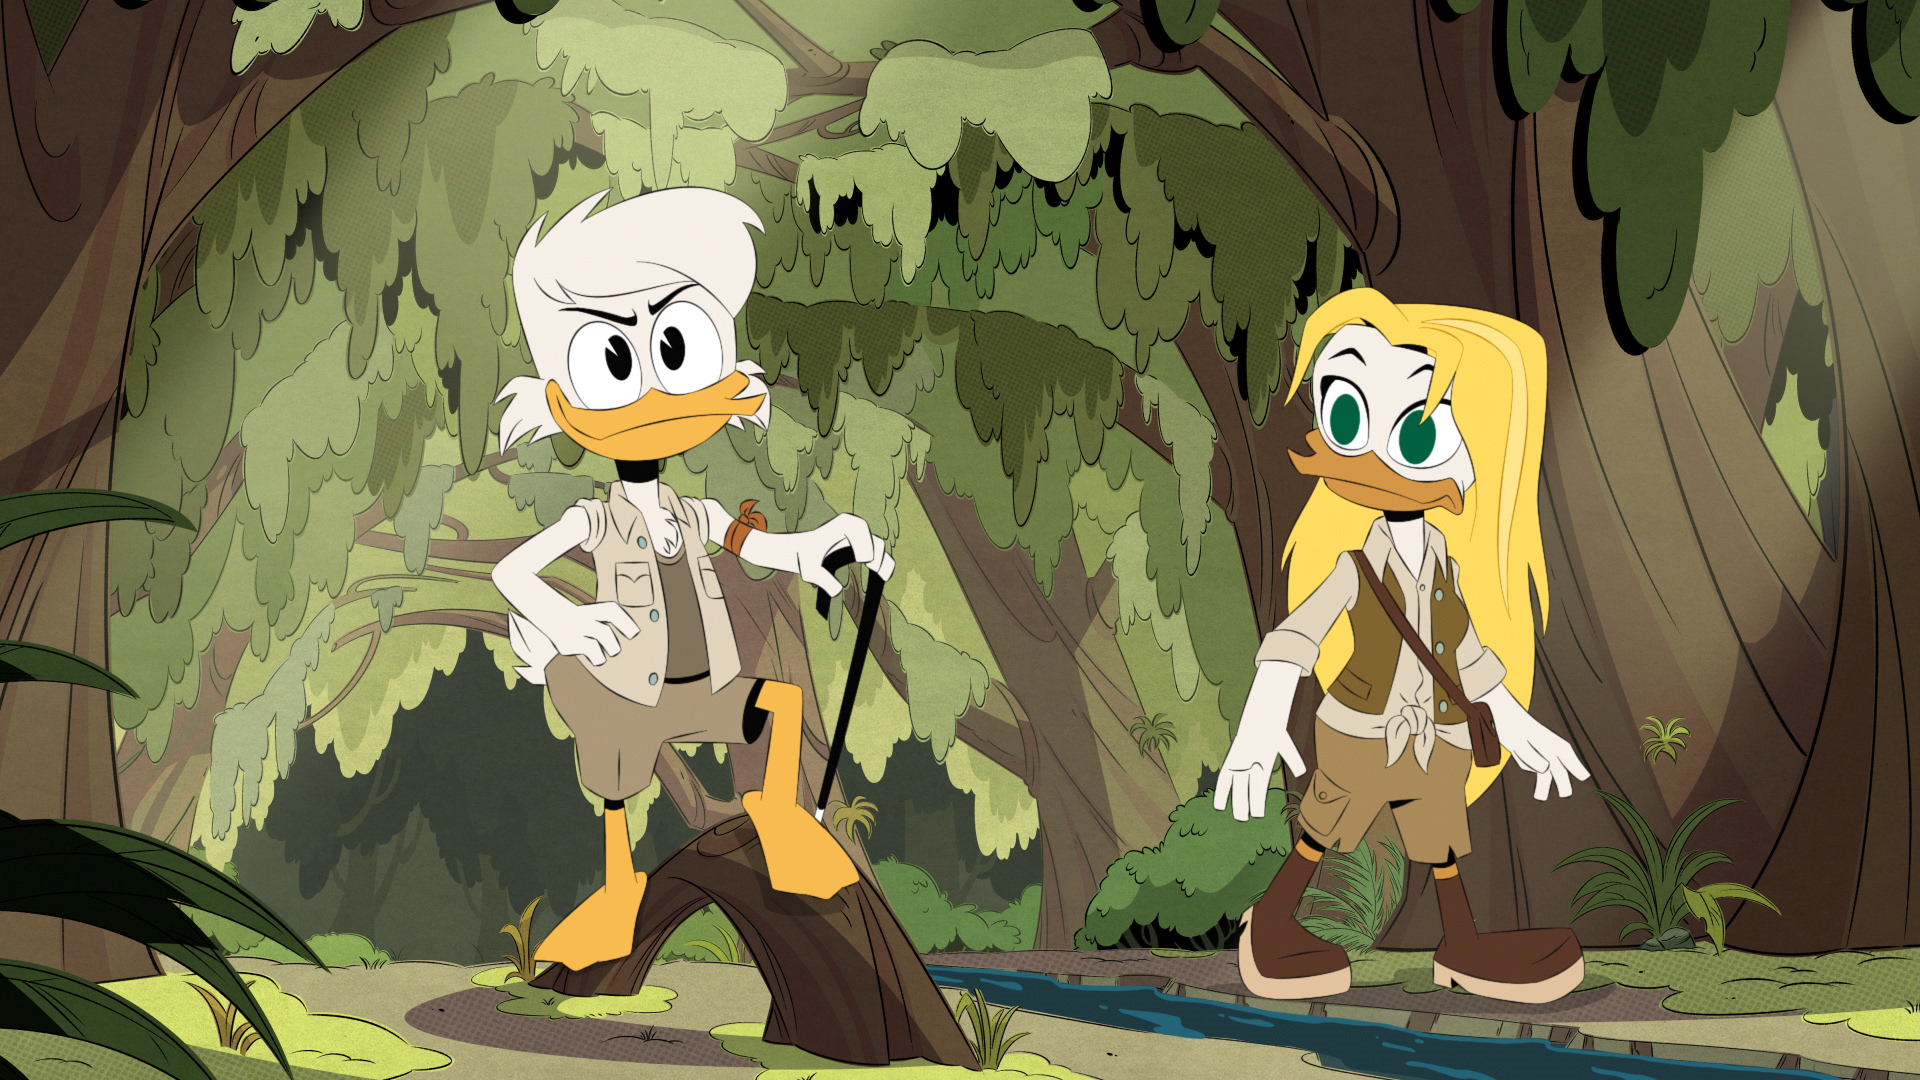 Usa Ducktales Season 3 Continues On Disney Xd Today With The Premiere